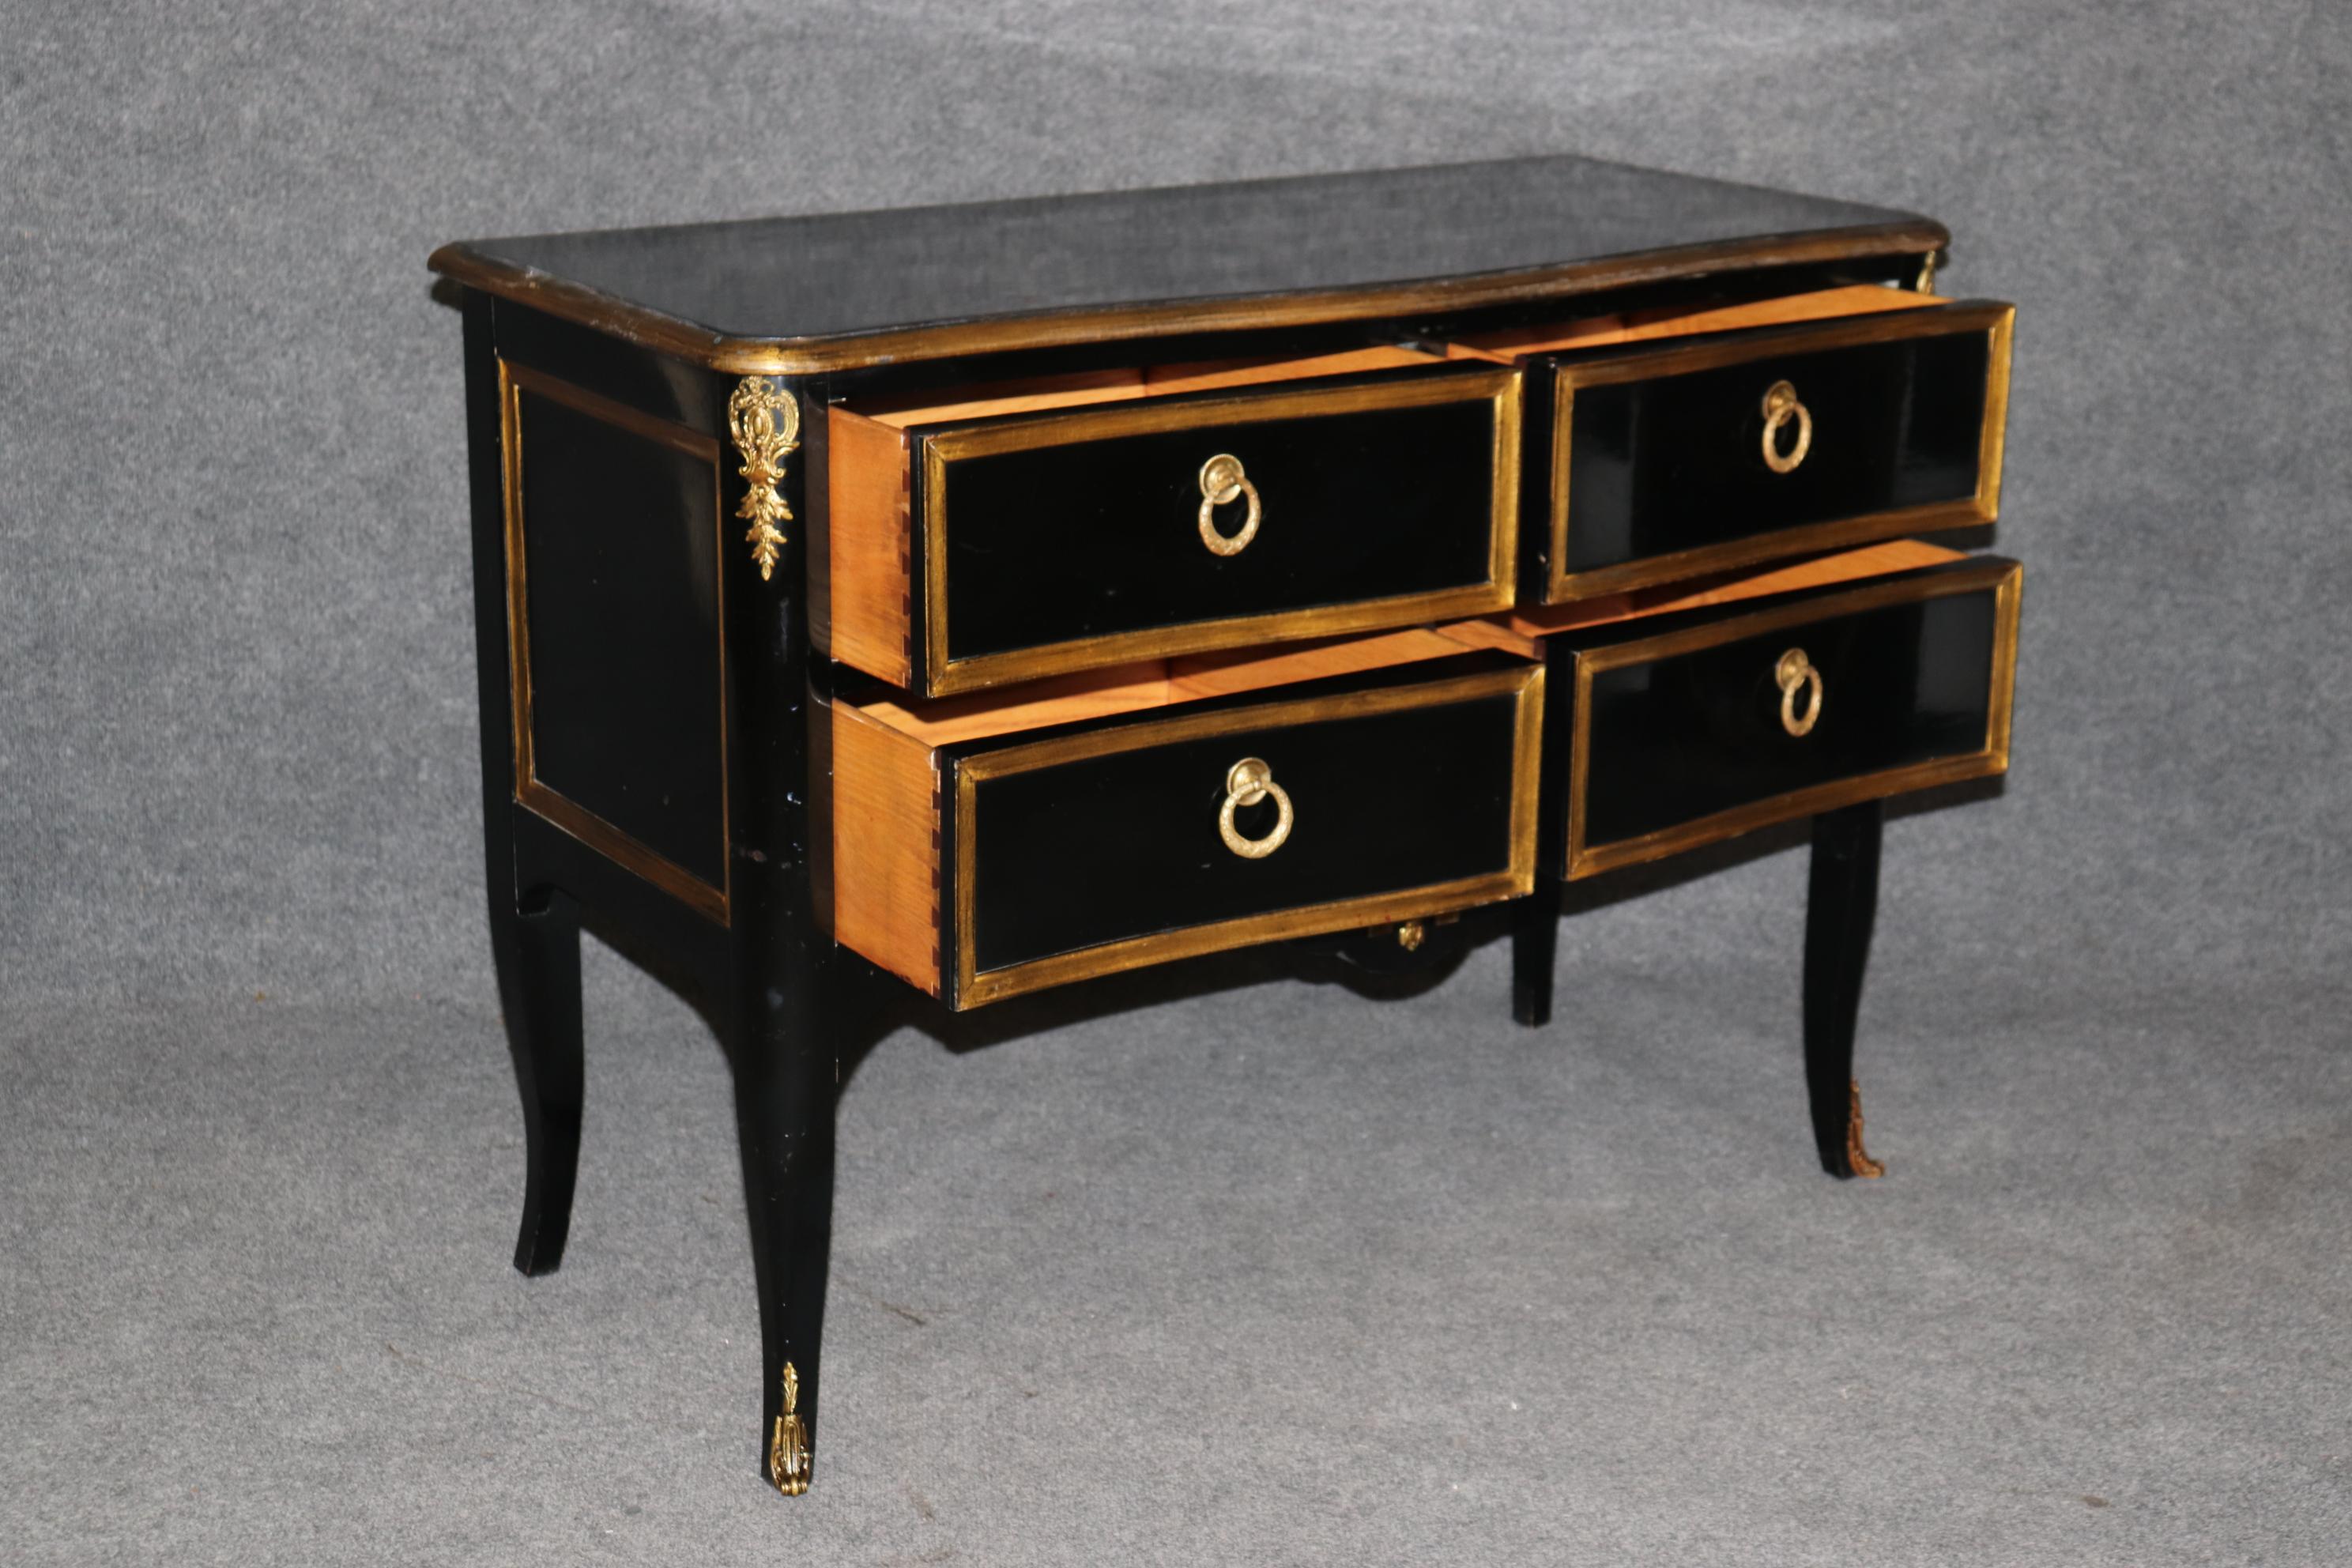 This is a superb Jaqcues Bodart 4 drawer commode. The commode is in very good condition with minor signs of wear and use as can be seen but is very minimal. The bronze is crisp and of the finest quality and the gold leaf adds a luminosity to the